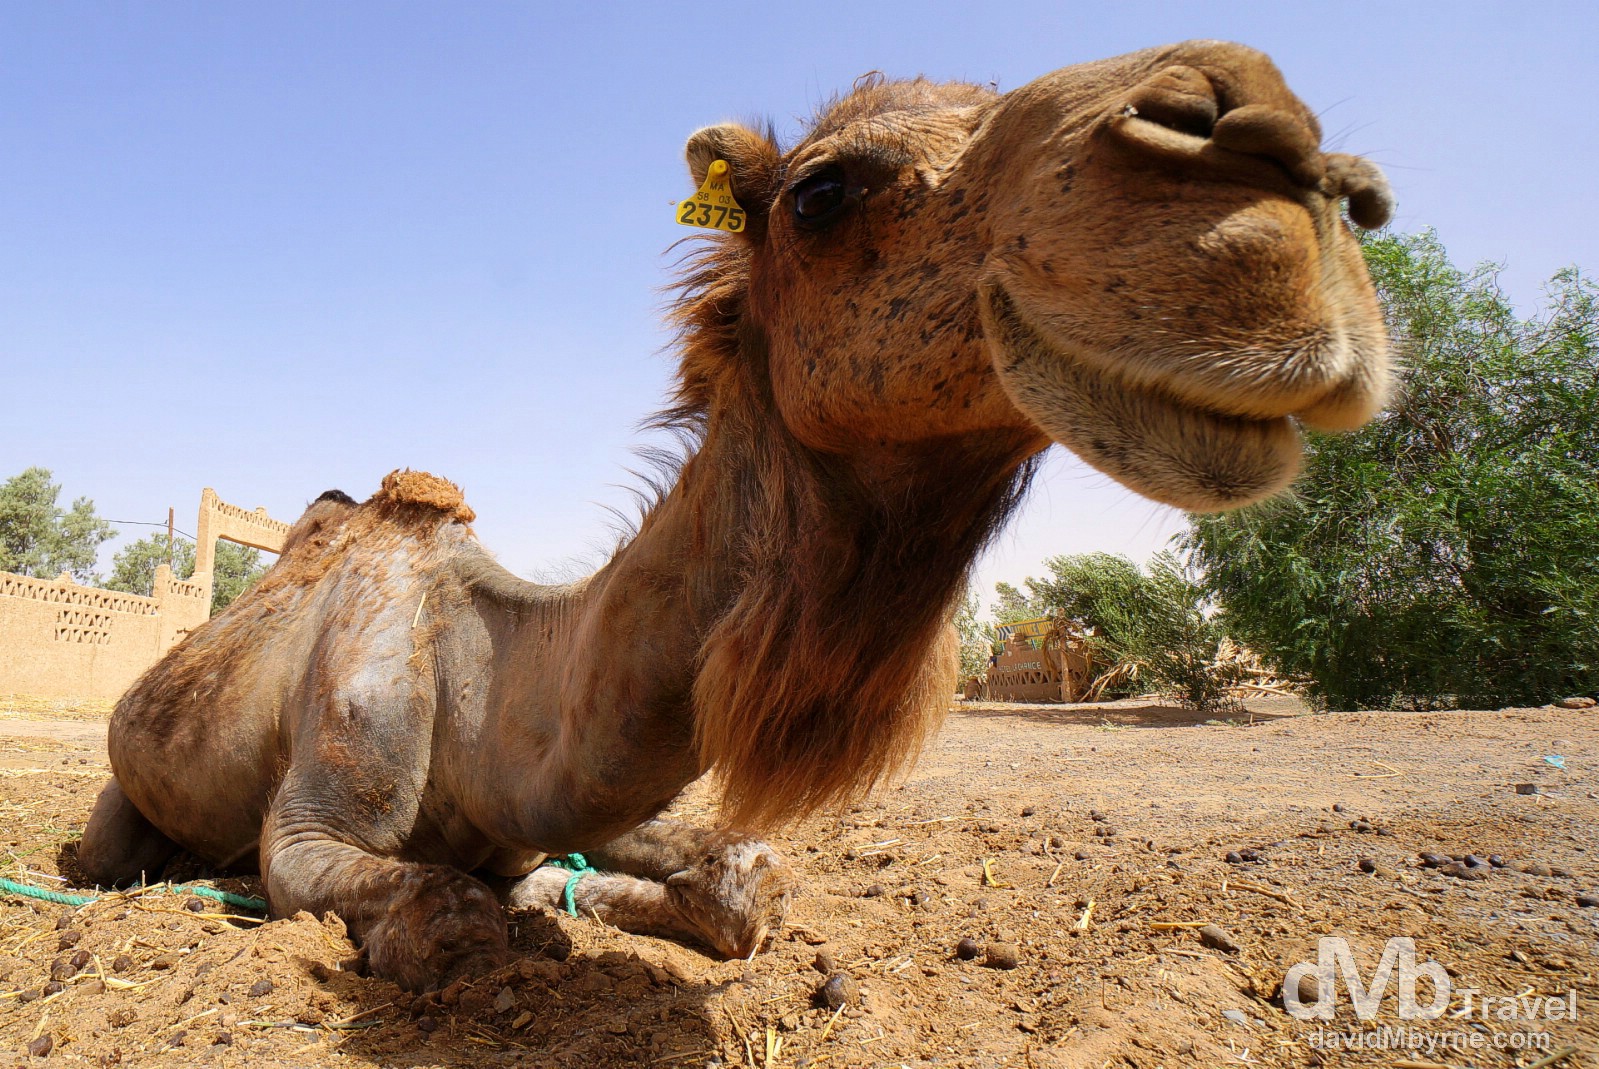 A camel in the grounds of Hotel Haven la Chance, Merzouga, Morocco. May 22nd, 2014.